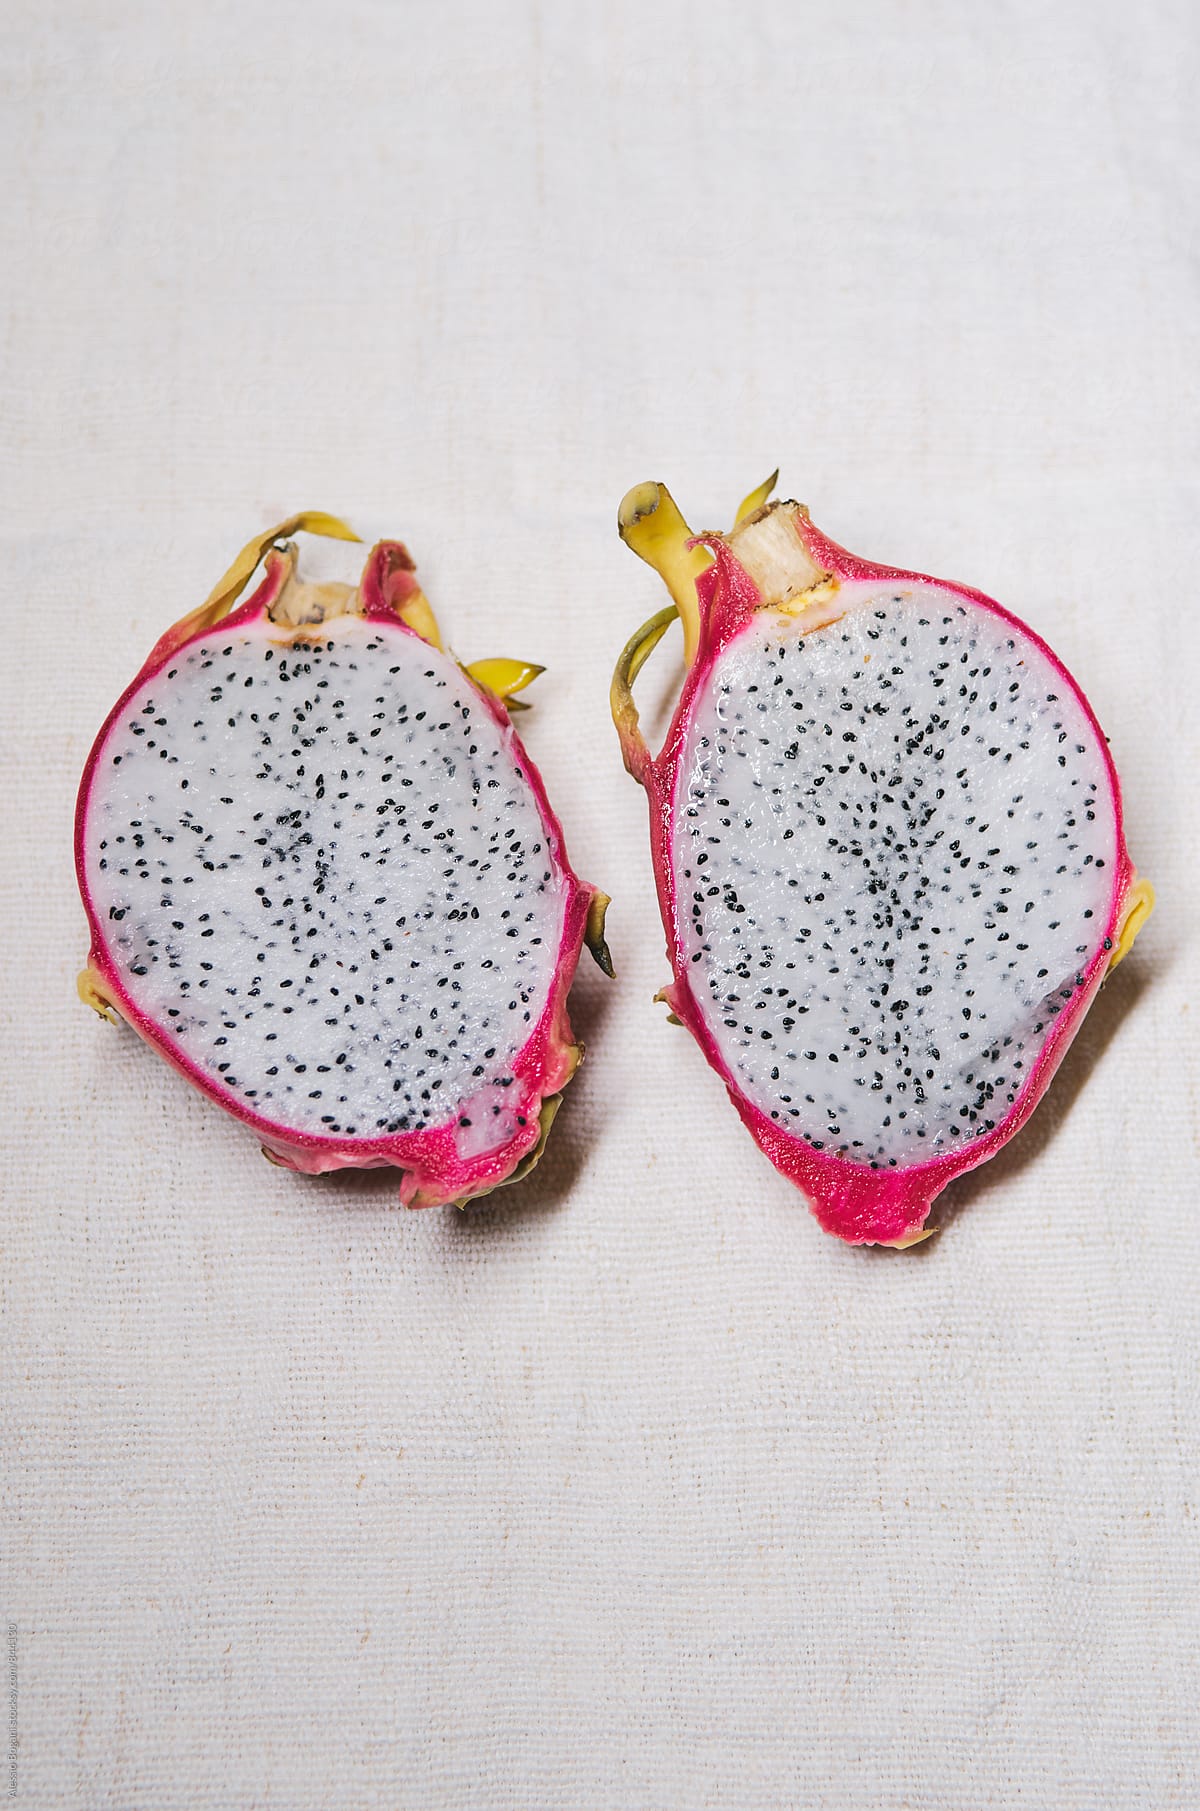 Dragon fruit with copyspace